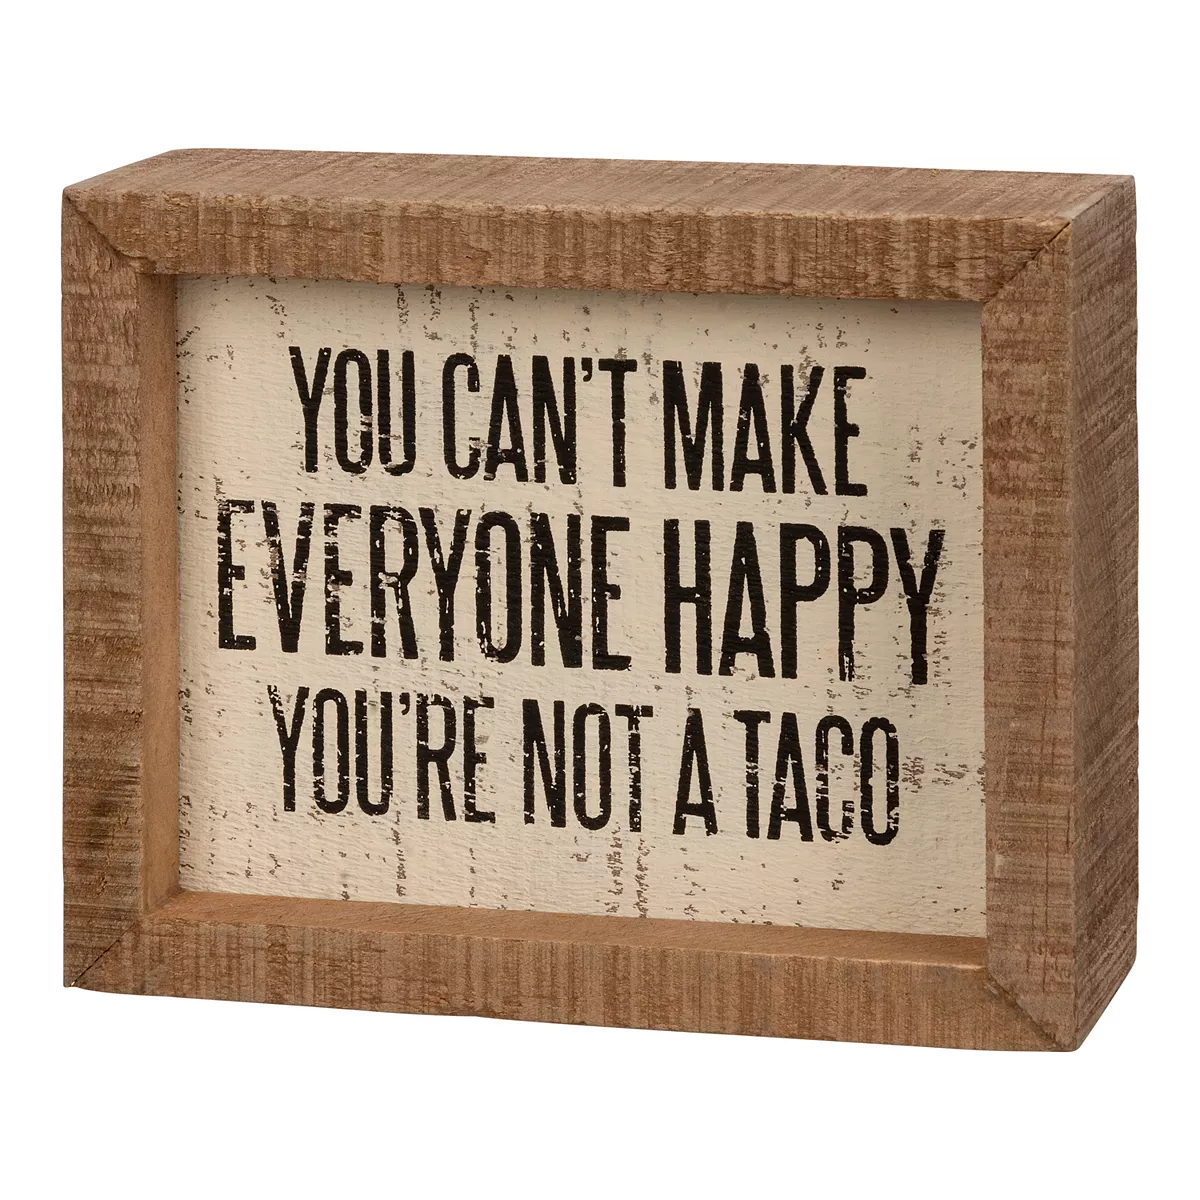 NEW You Can&#39;t Make Everyone Happy You&#39;re Not a Taco Wooden Box Sign 5x4x... - $7.50